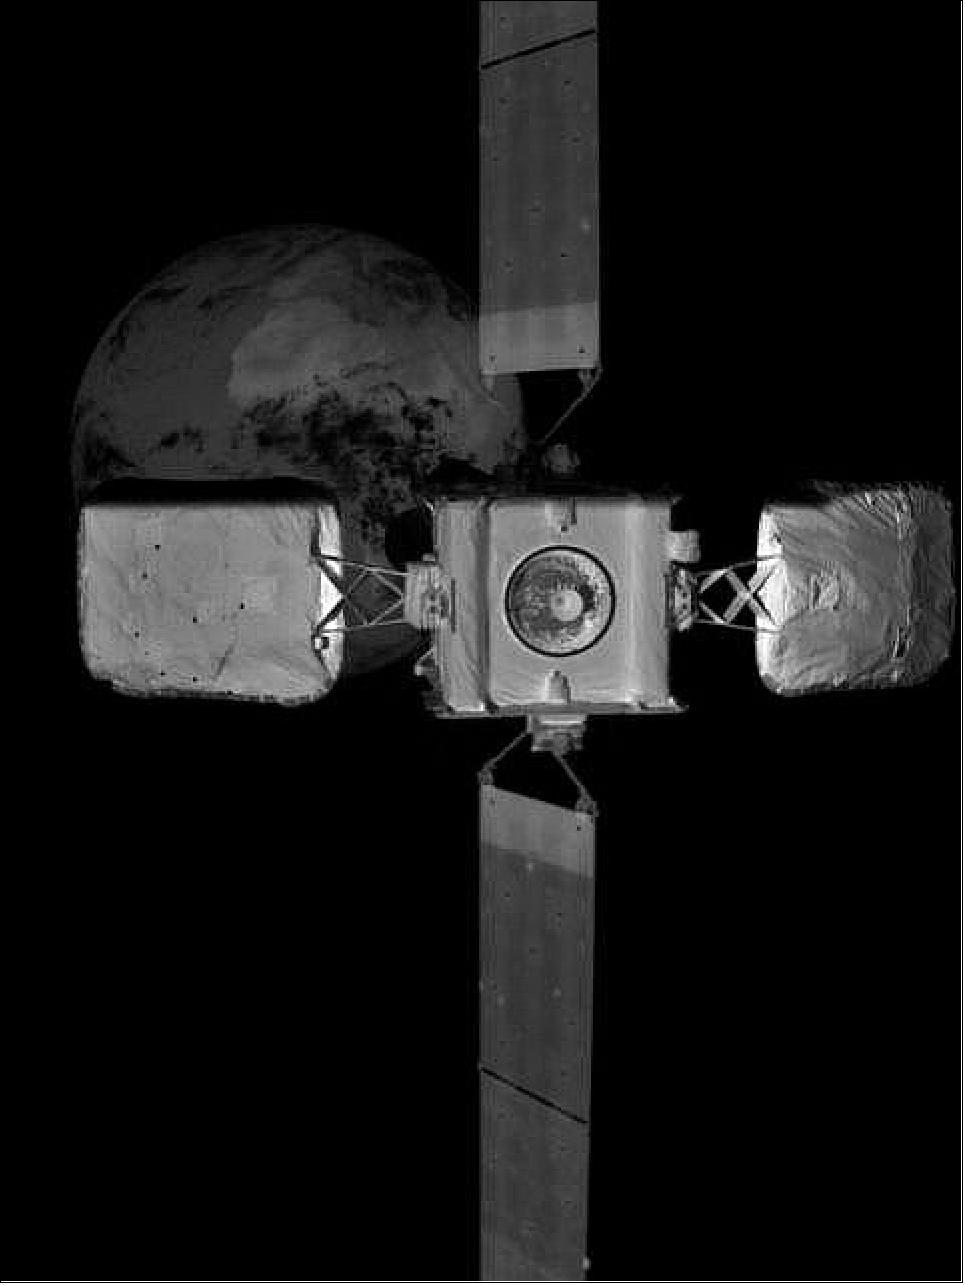 Figure 7: An image of Intelsat 10-02 taken by MEV-2’s infrared wide field of view camera at 15m away (image credit: Northrop Grumman)